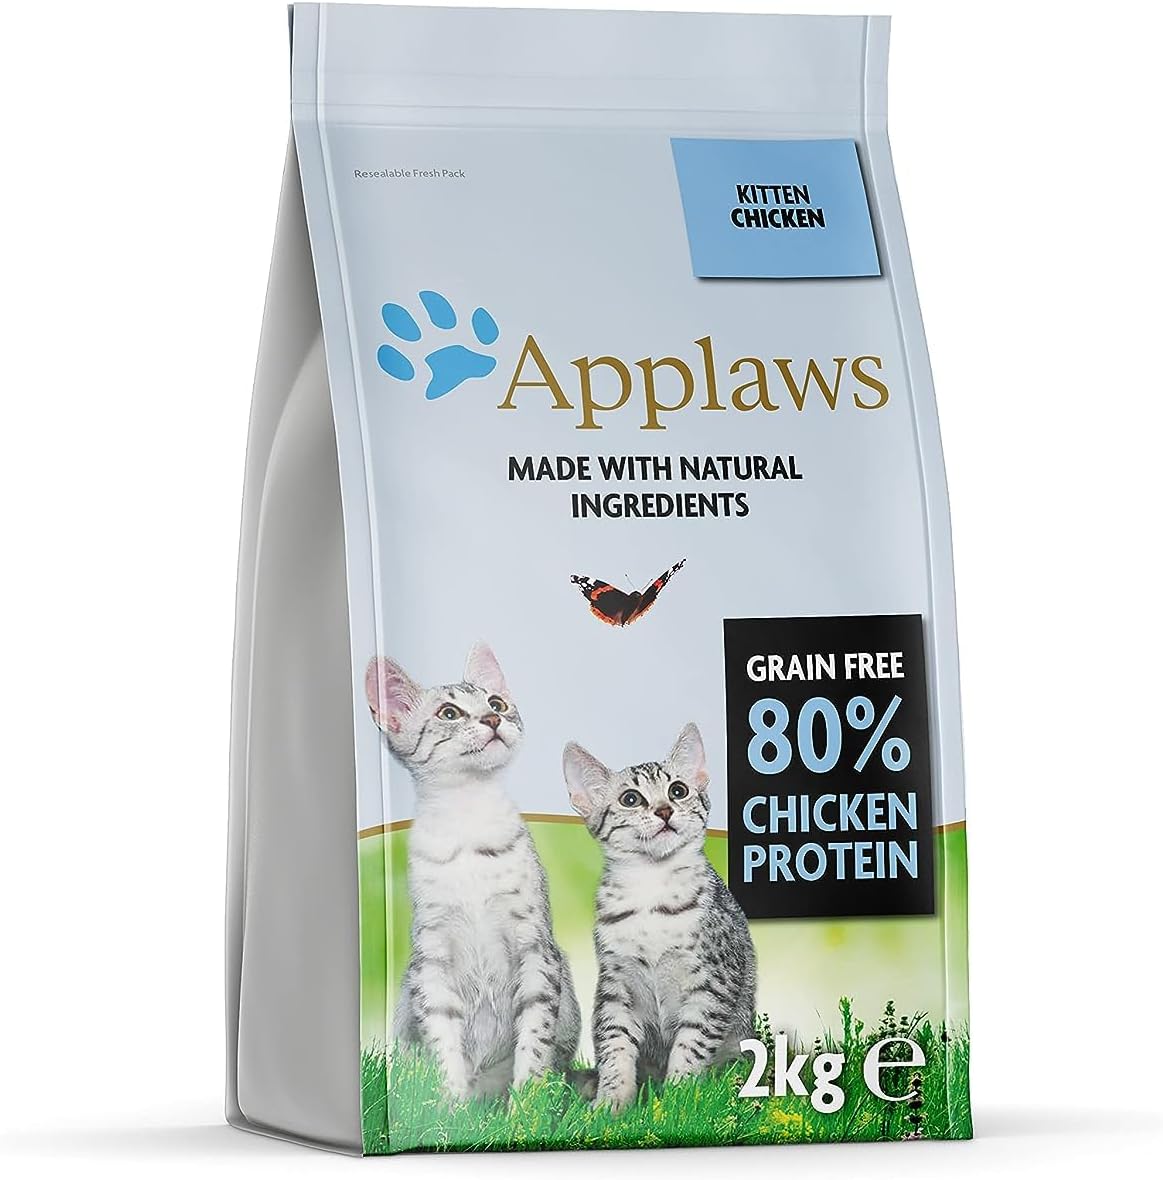 Applaws Complete Natural and Grain Free Dry Kitten Cat Food with Chicken, 2 kg Bag (Pack of 1),Packaging may vary?9100938